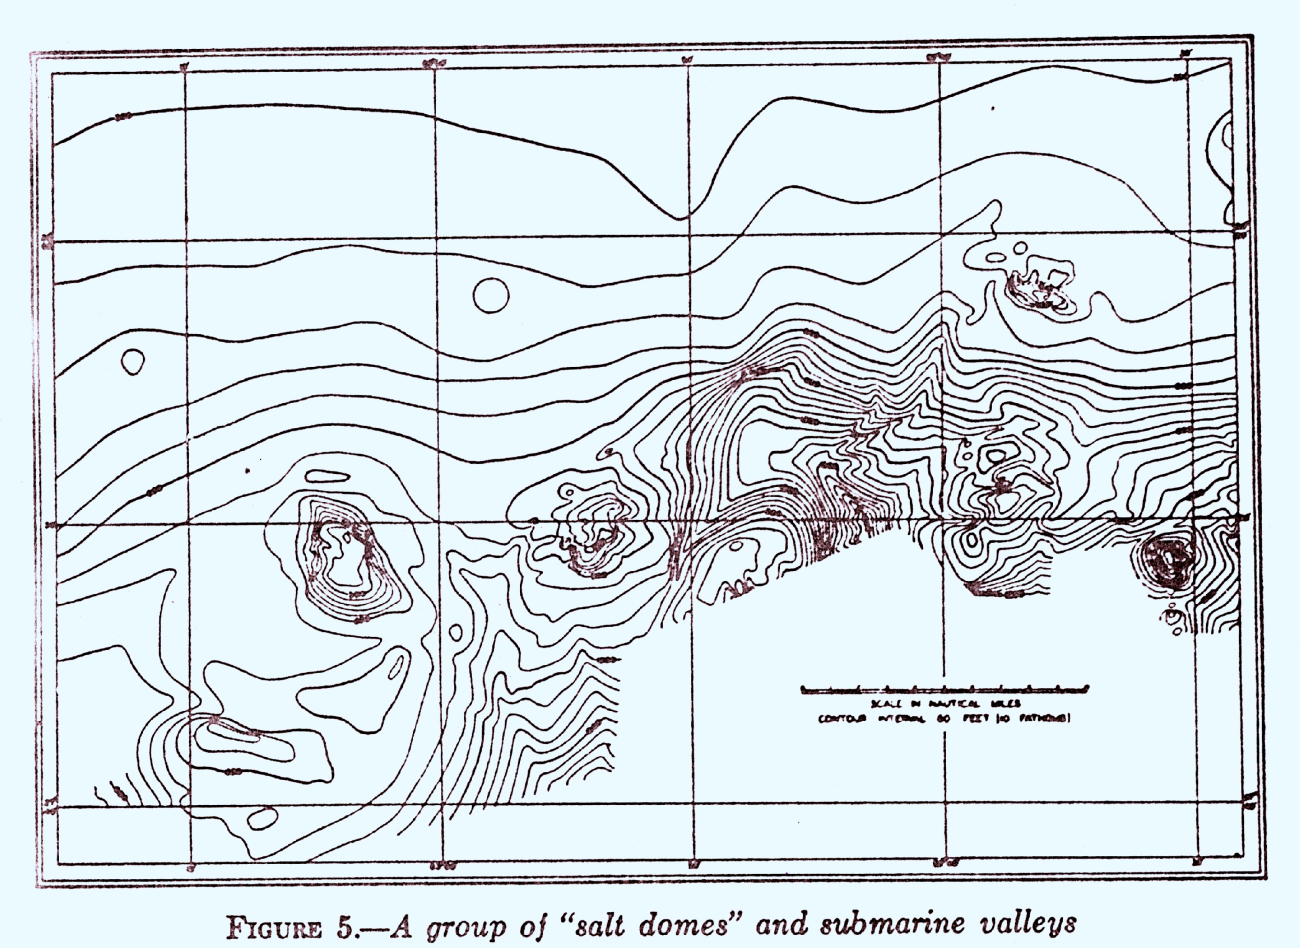 Salt domes discovered by Coast and Geodetic Survey, described andinterpreted by Francis Shepard